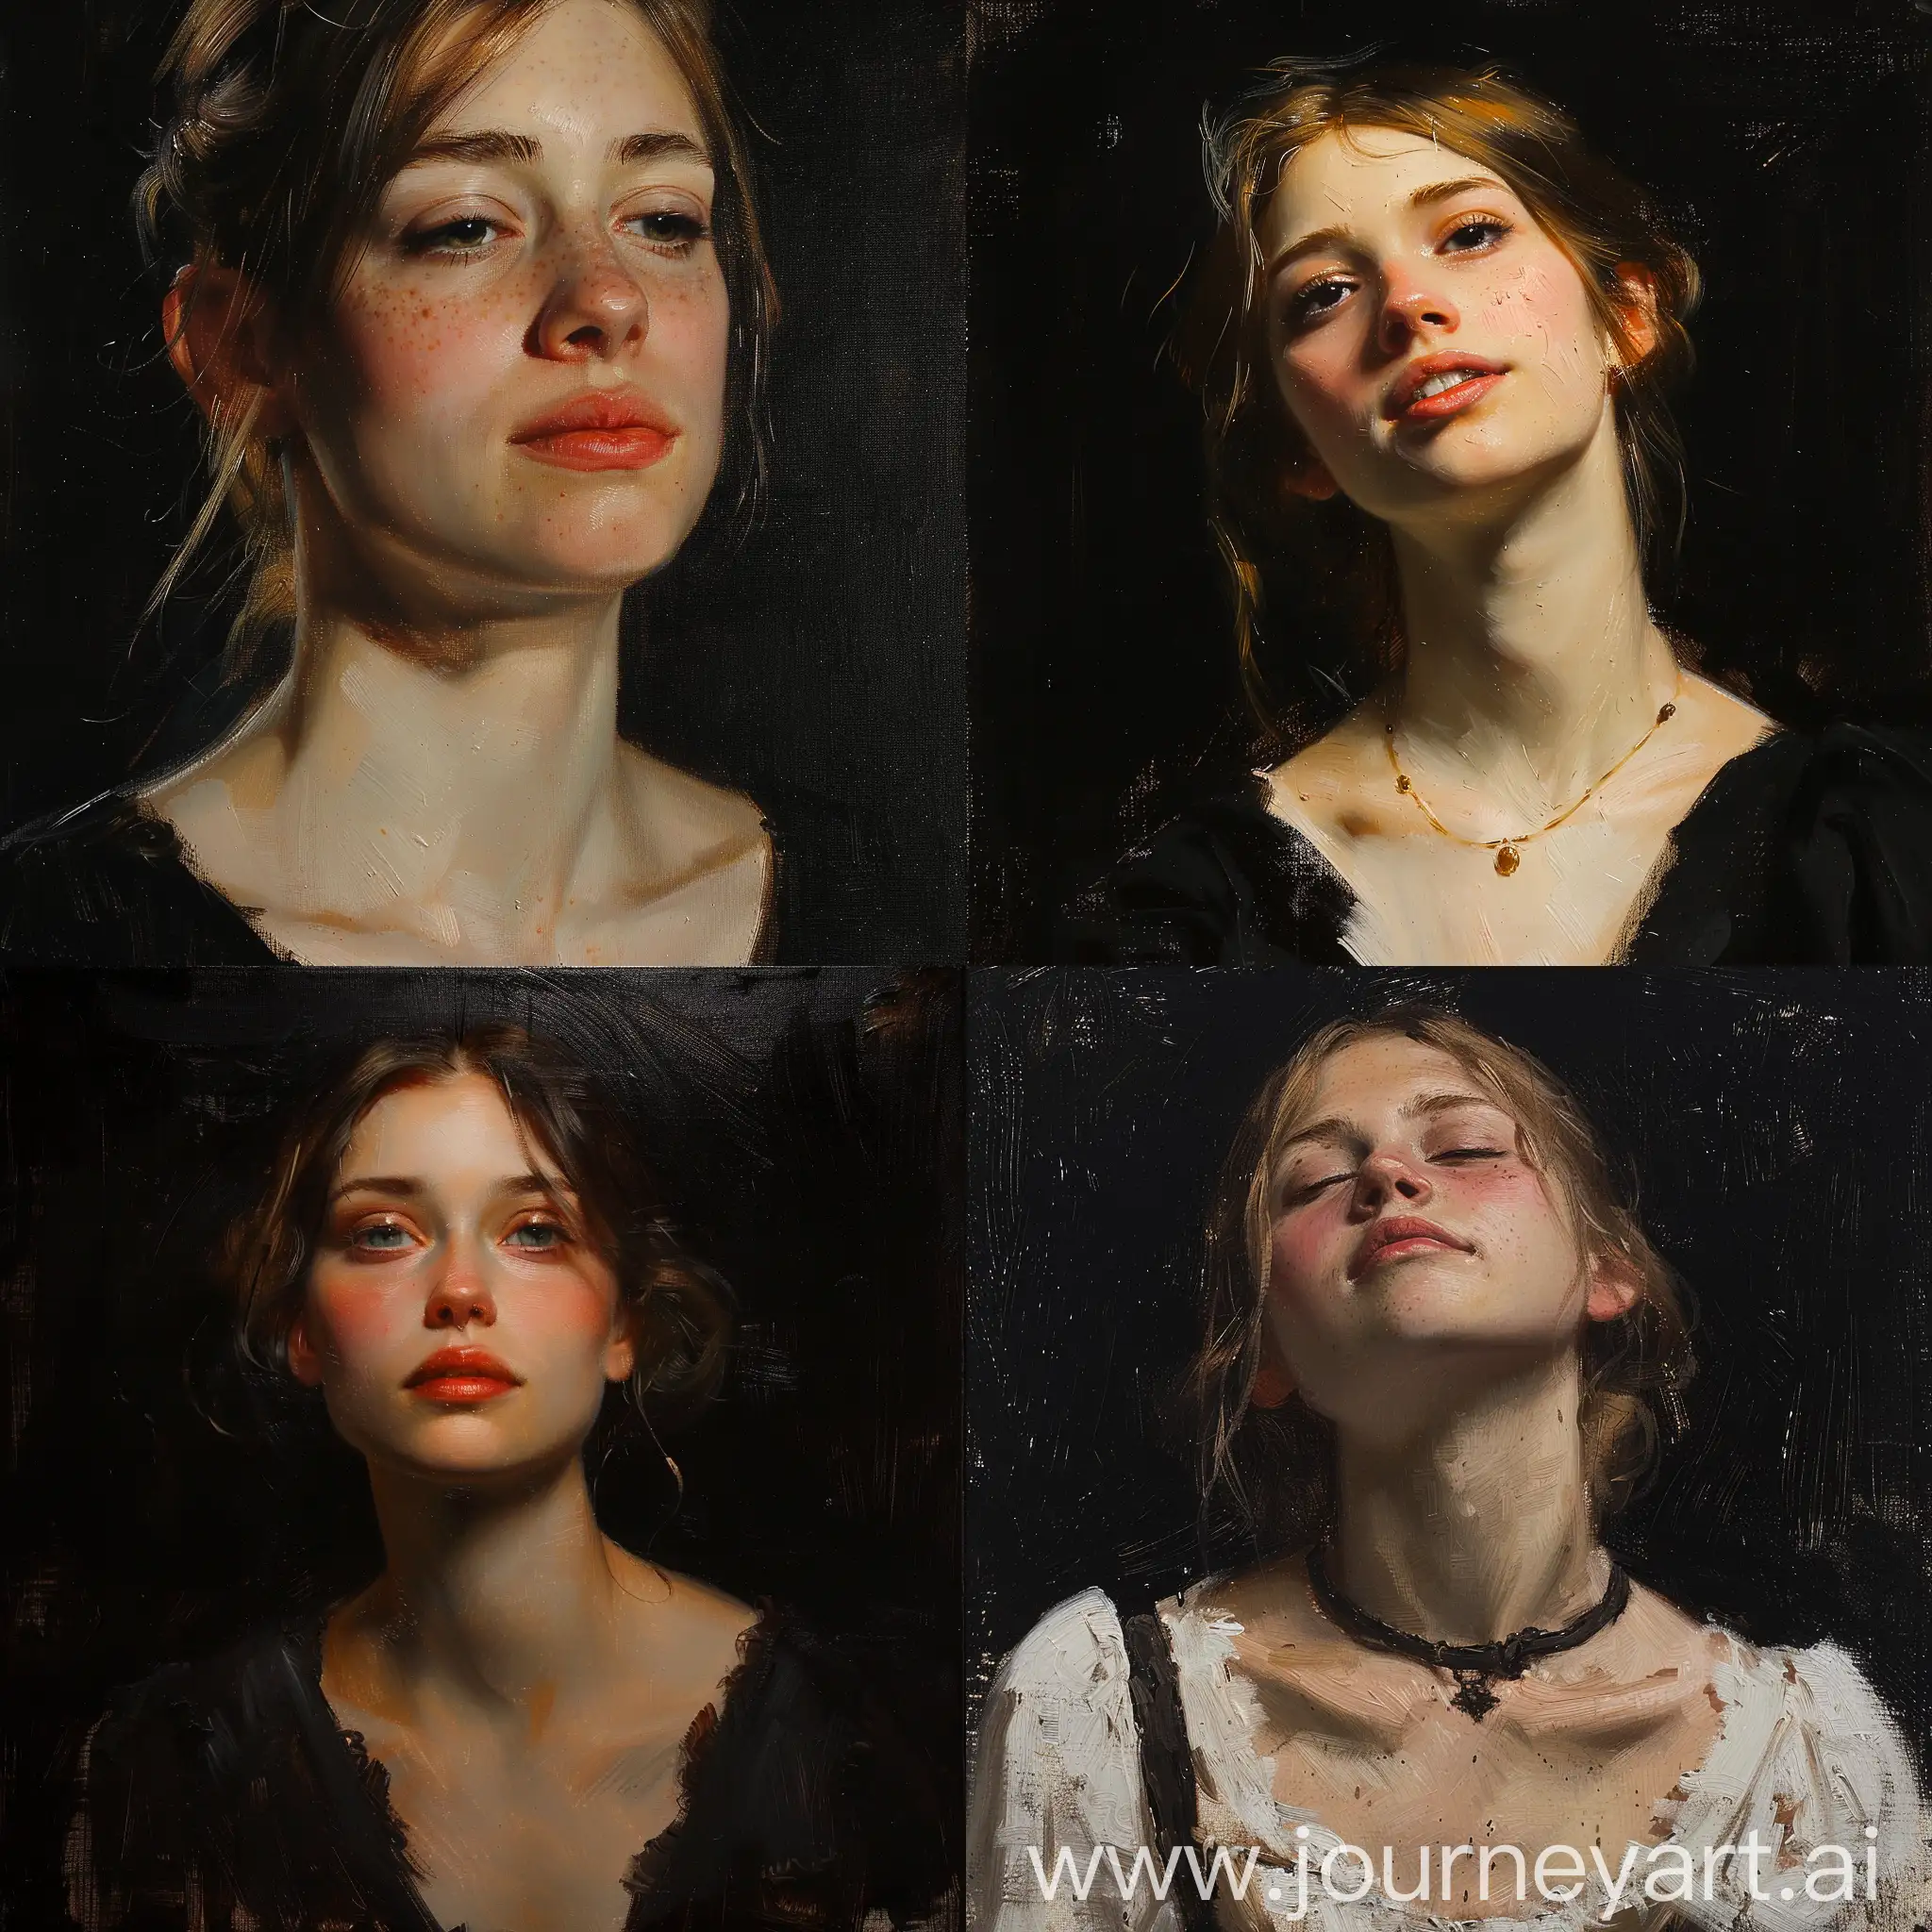 Modern emotional Oil sketch of a young gorgeous woman, wlop John singer Sargent, jeremy lipkin and rob rey, range murata jeremy lipking, John singer Sargent, black background, jeremy lipkin, lensculture portrait awards, casey baugh and james jean, detailed realism in painting, award-winning portrait, amazingly detailed oil painting, brushstrokes, Sean cheetham, details, well painted, good colors, strong shadows, black background 